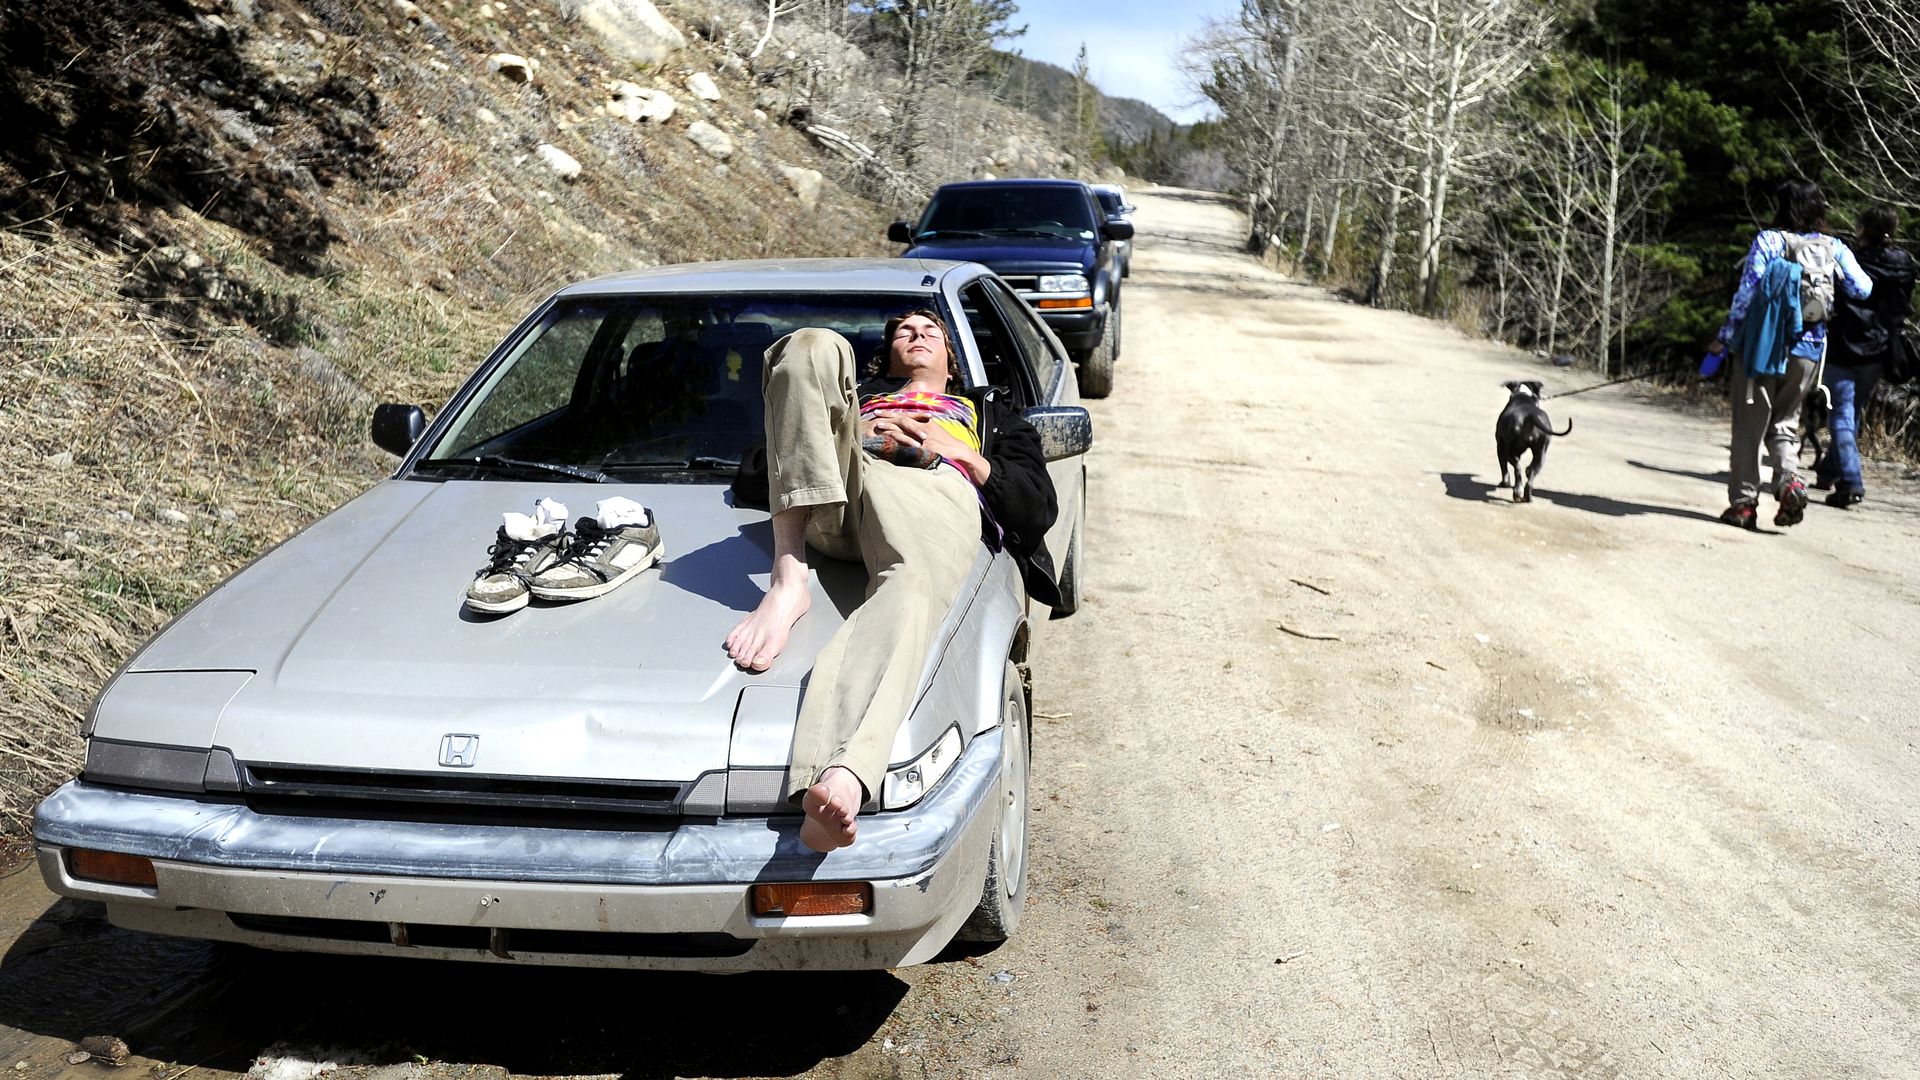 Image of a hiker napping on the hood of his car near a trailhead while hikers walk by. 